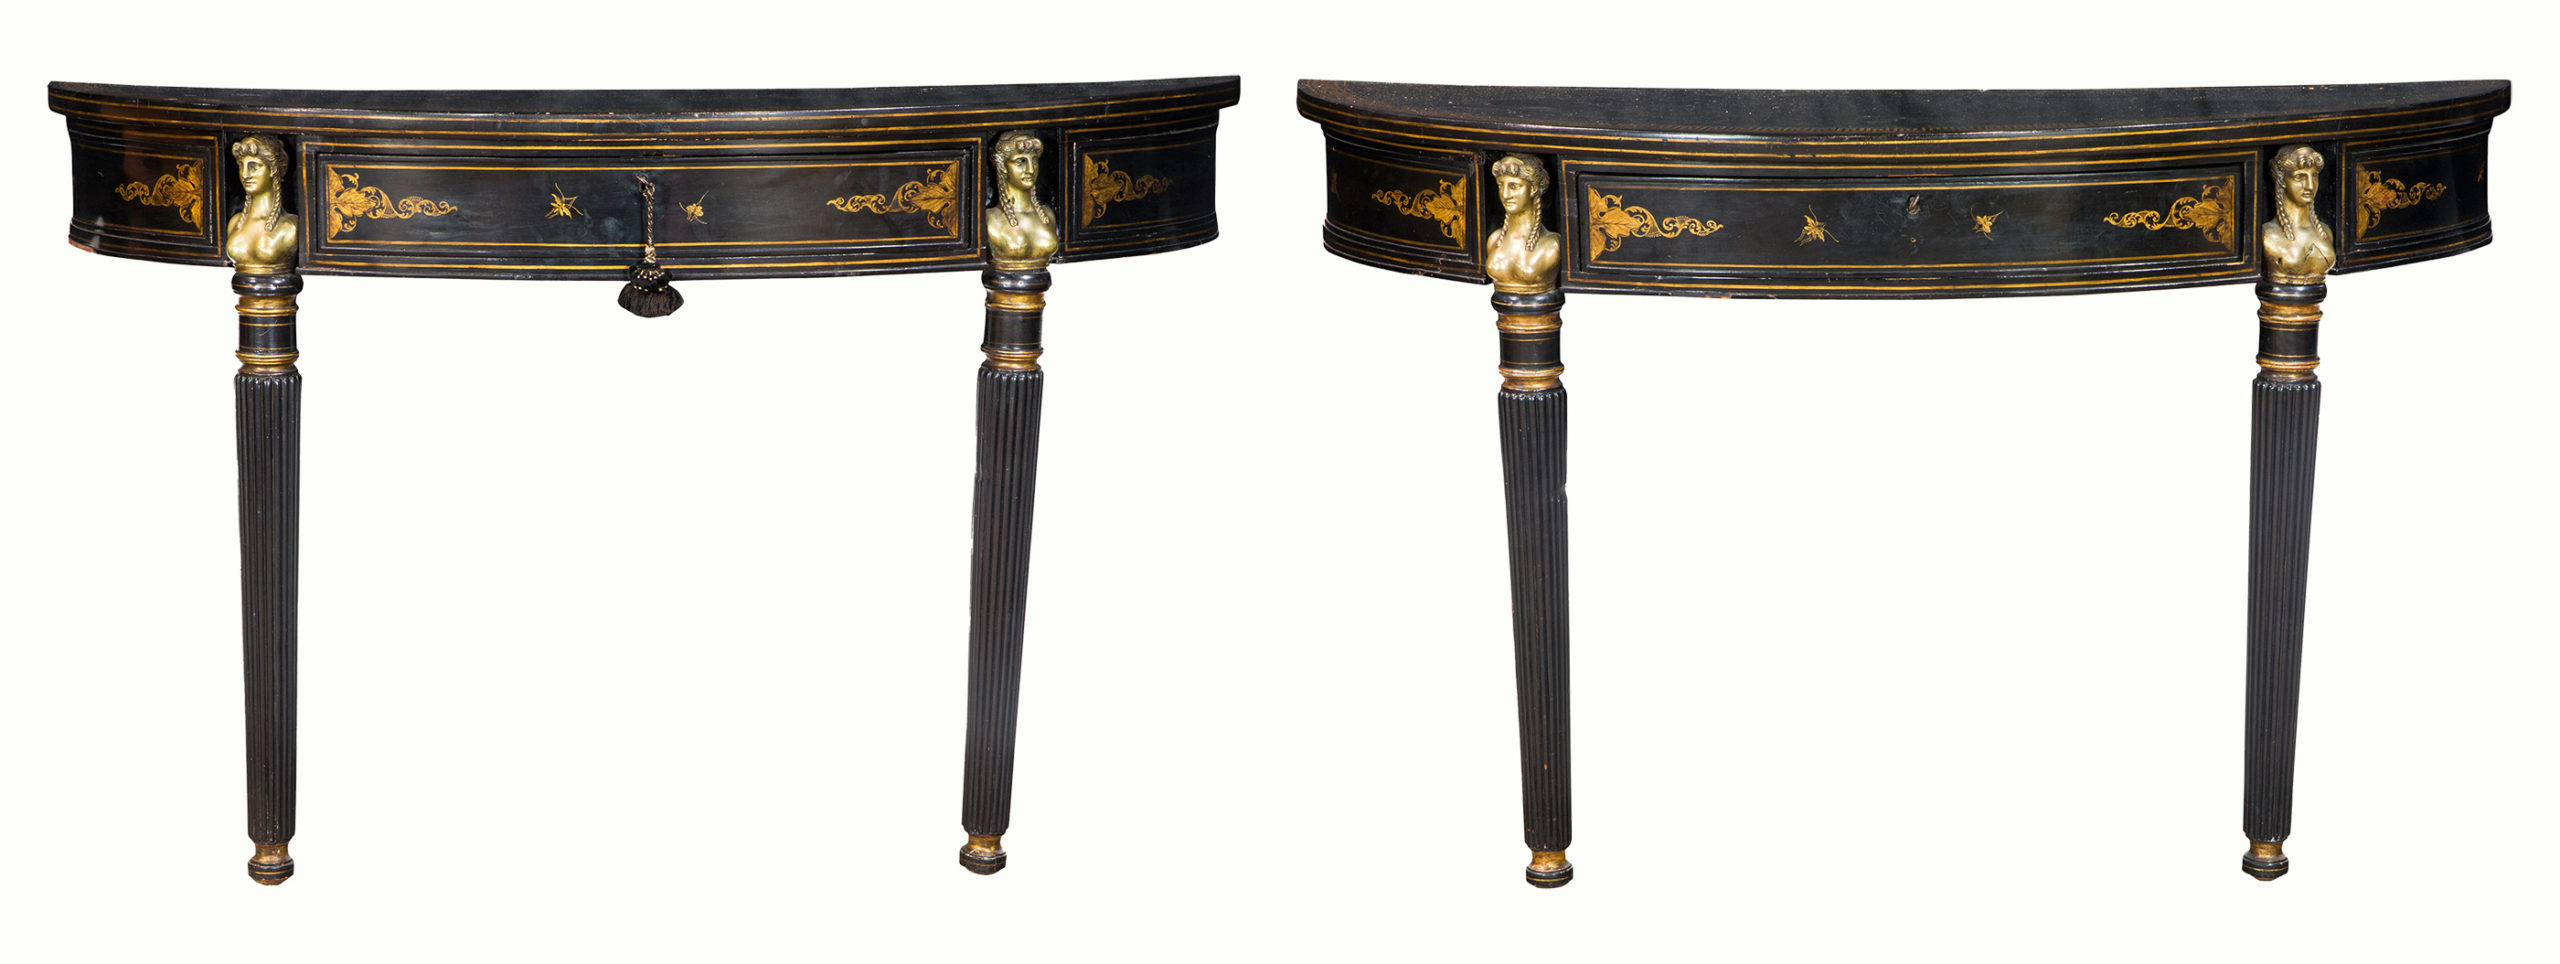 A rare pair of French brass inlaid and bronze mounted Demilune tables